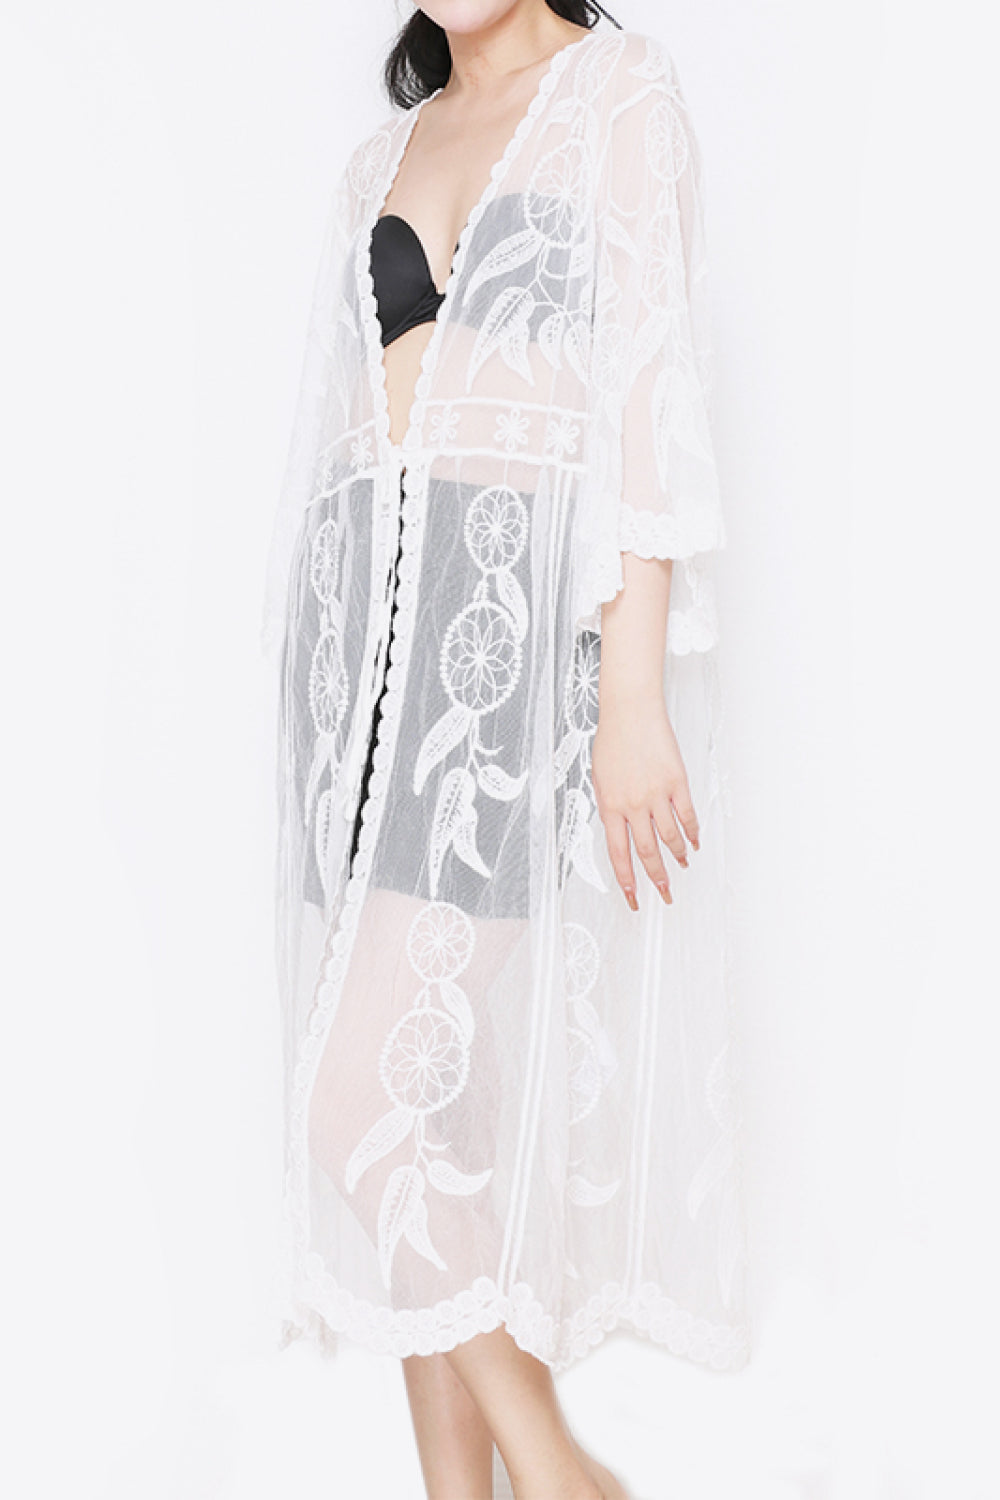 Tied Sheer Cover Up Cardigan - TRENDMELO